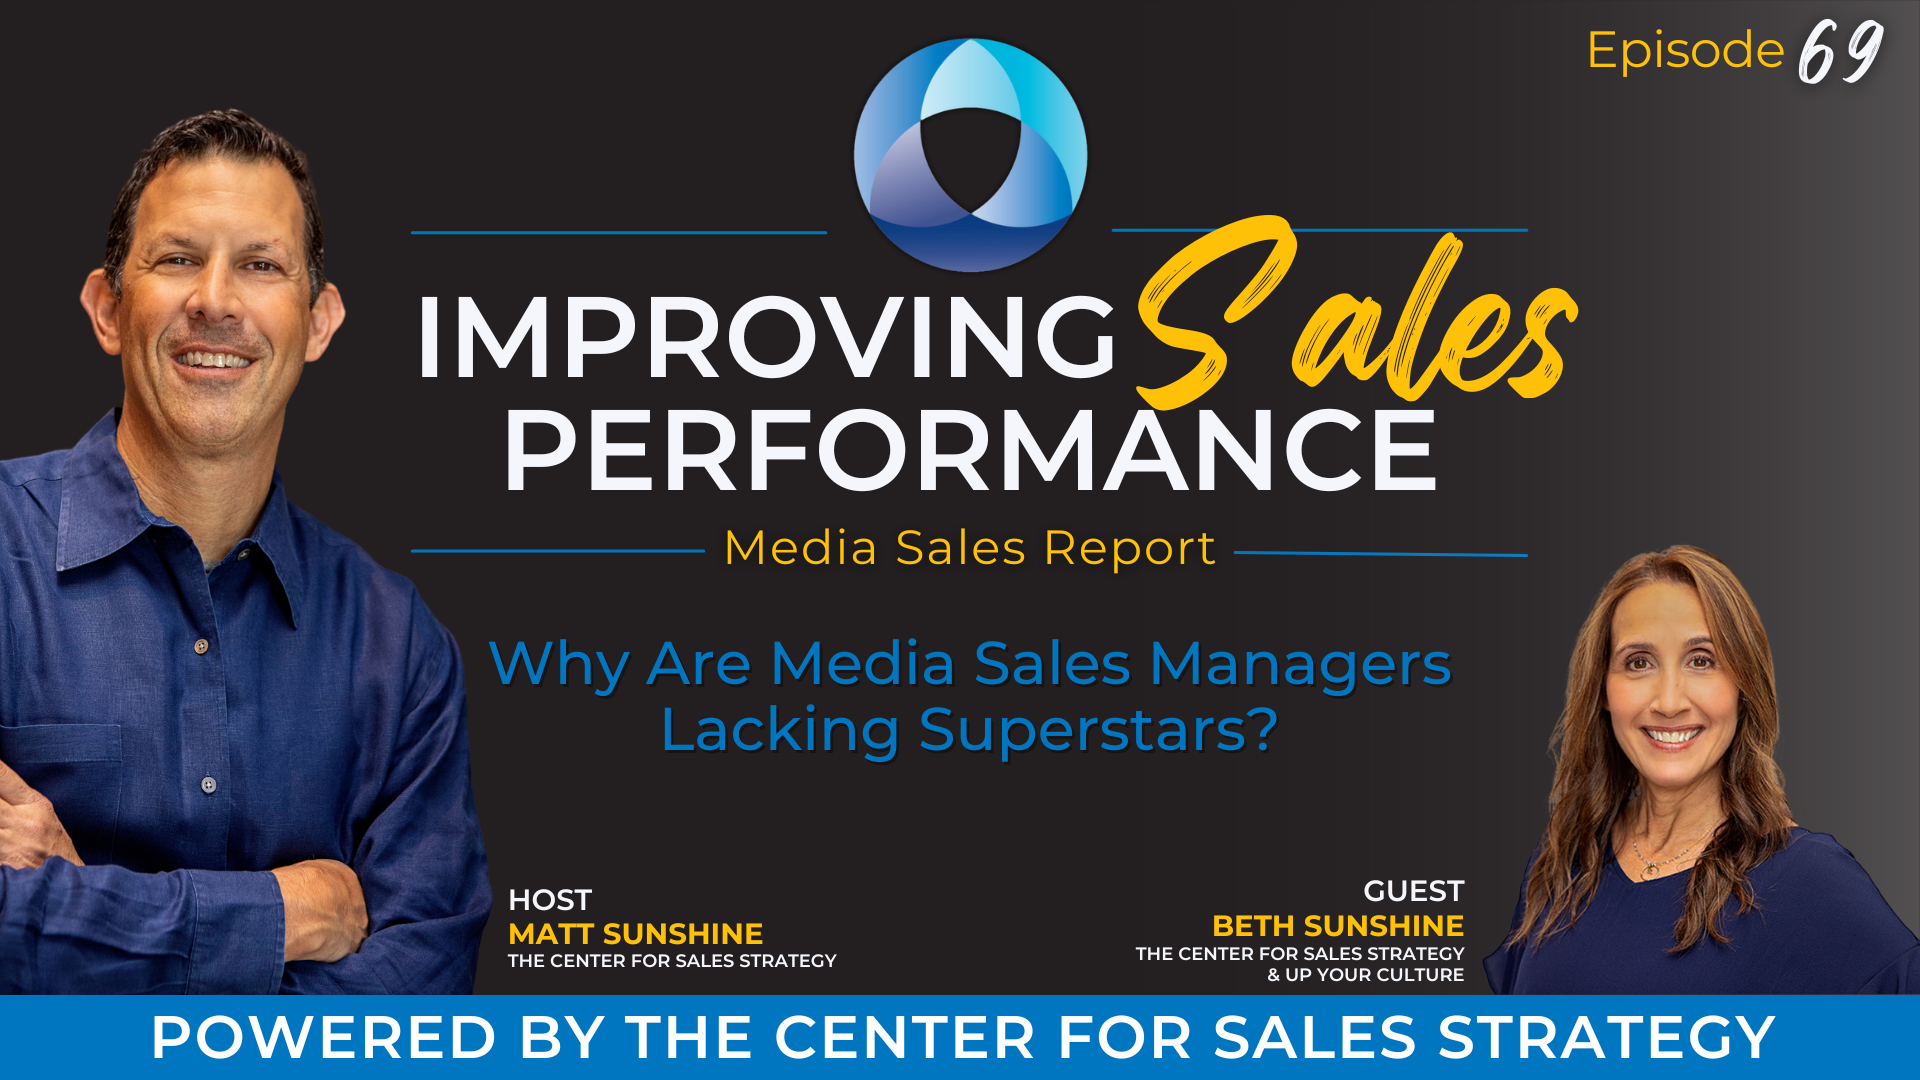 Why Are Media Sales Managers Lacking Superstars? With Beth Sunshine